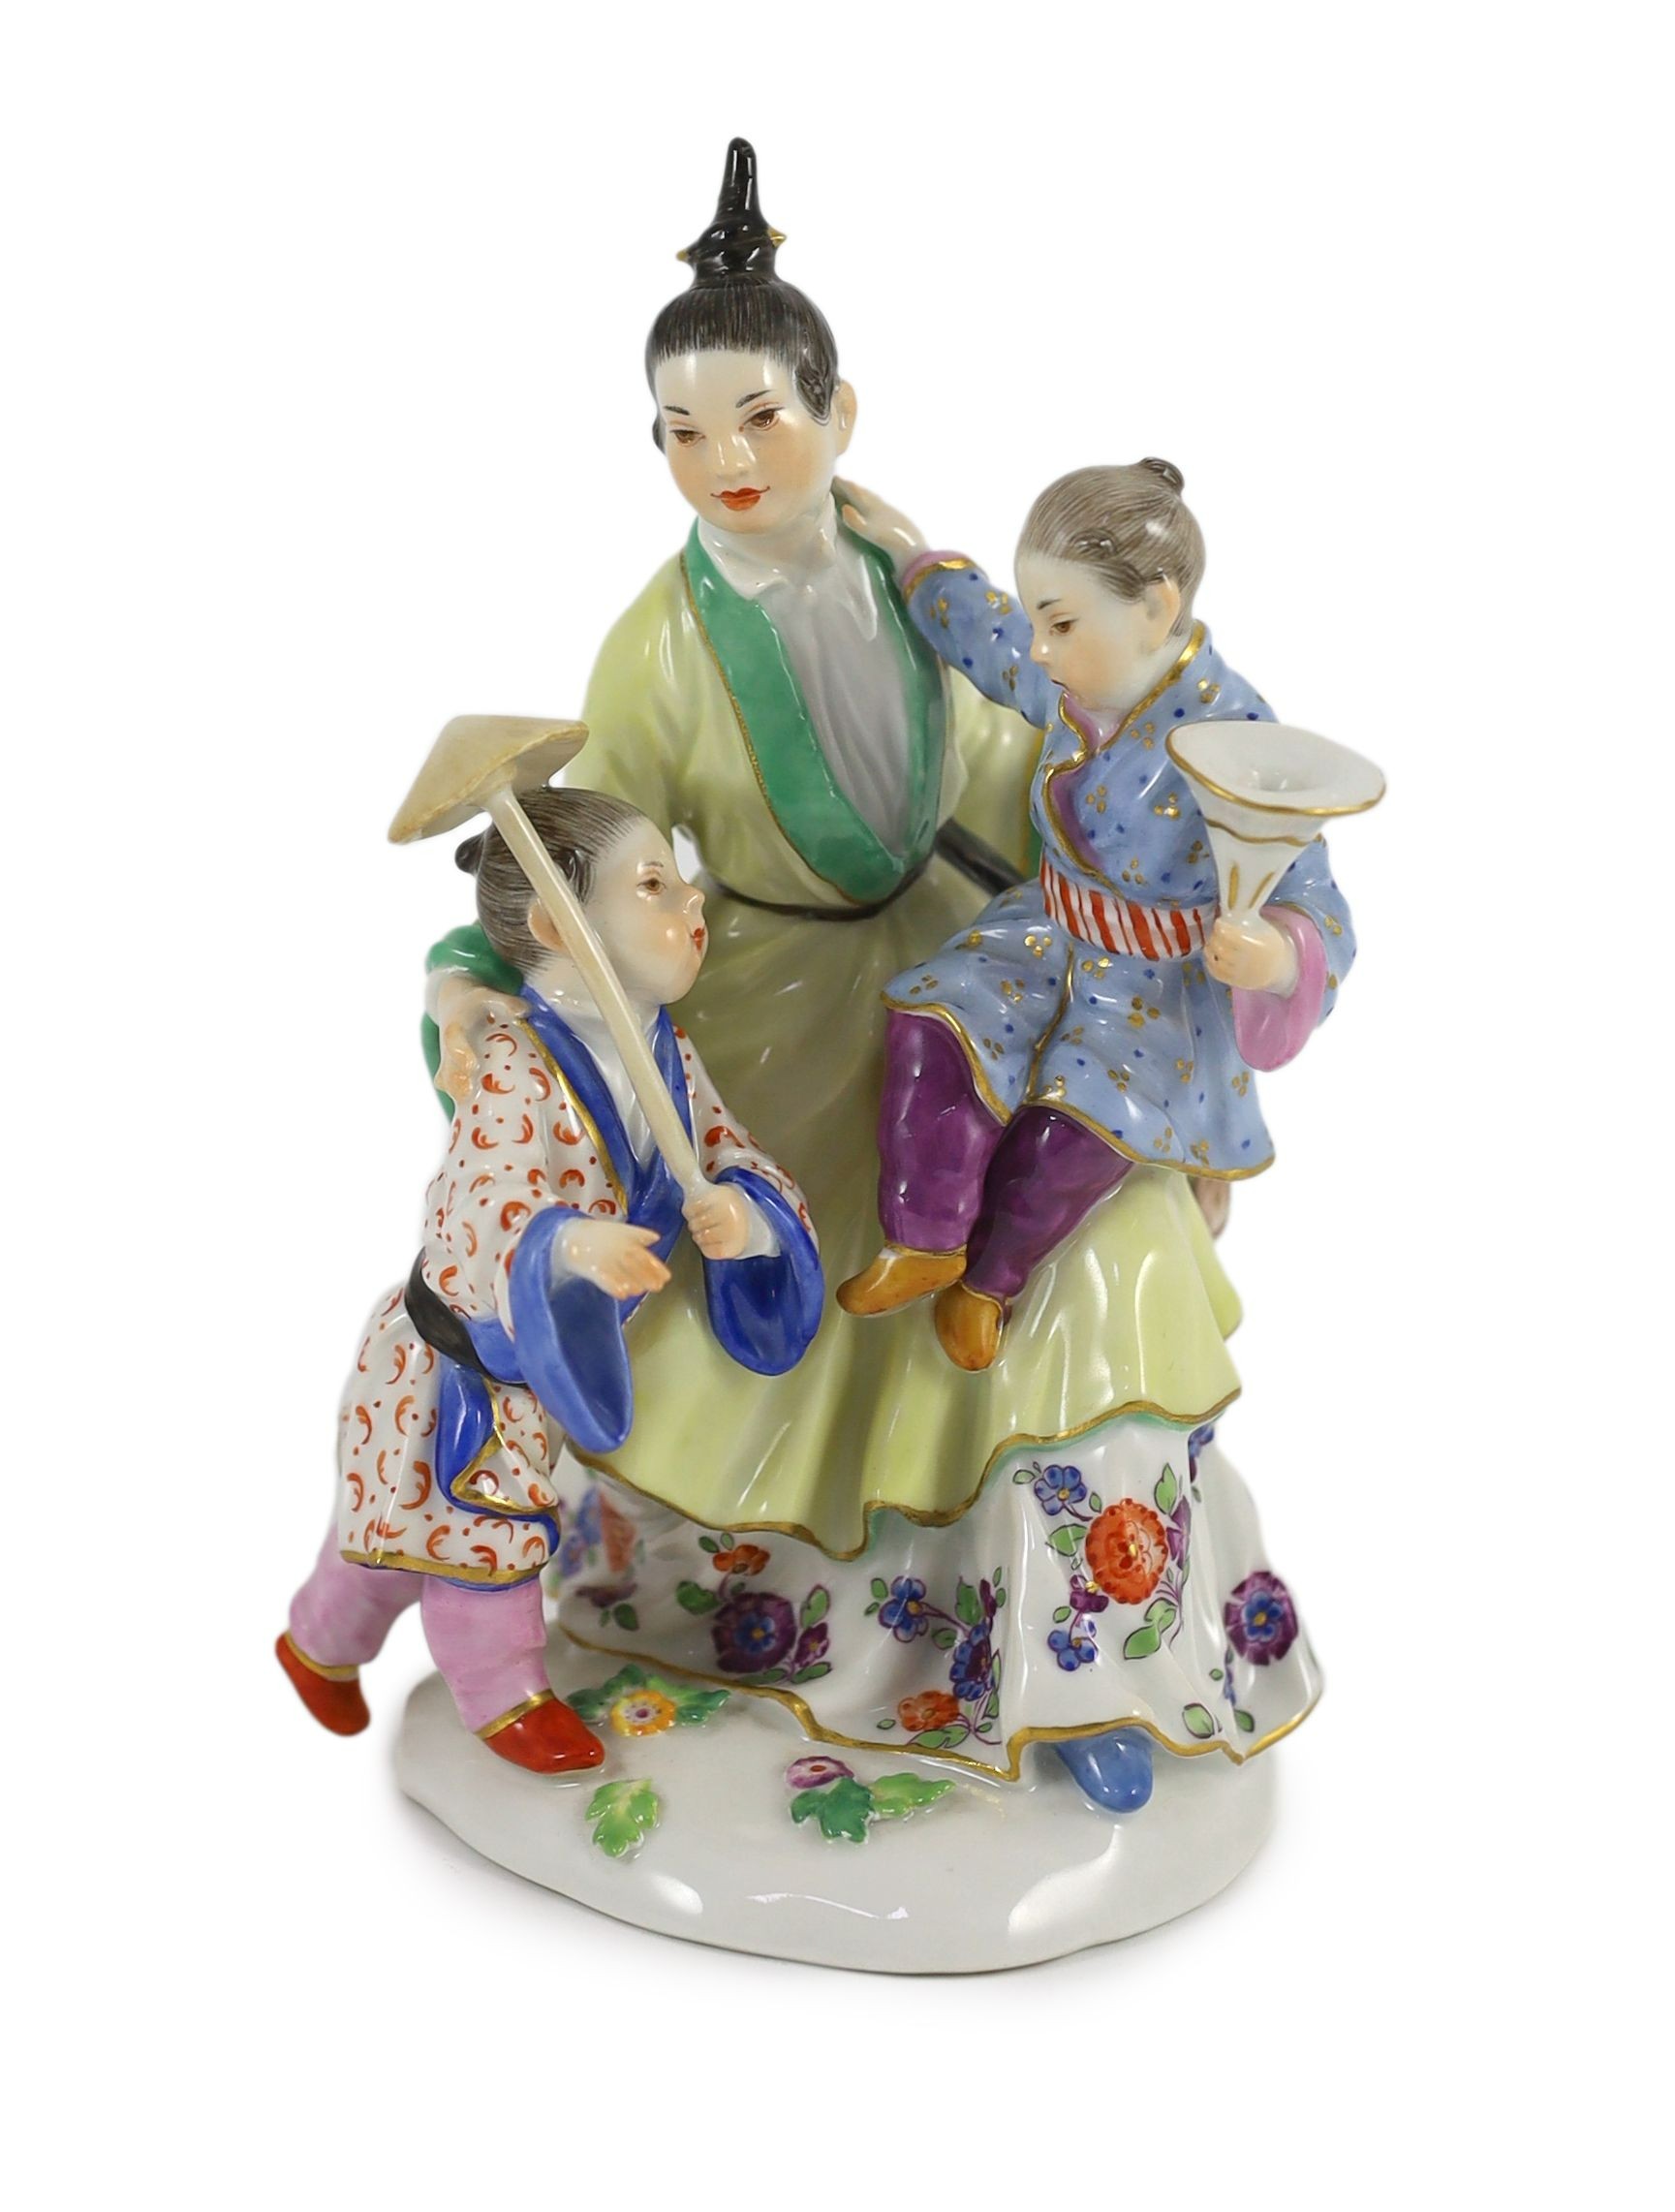 A Meissen group of a Chinese woman and two children, 20th century, 14.5 cm high                                                                                                                                             